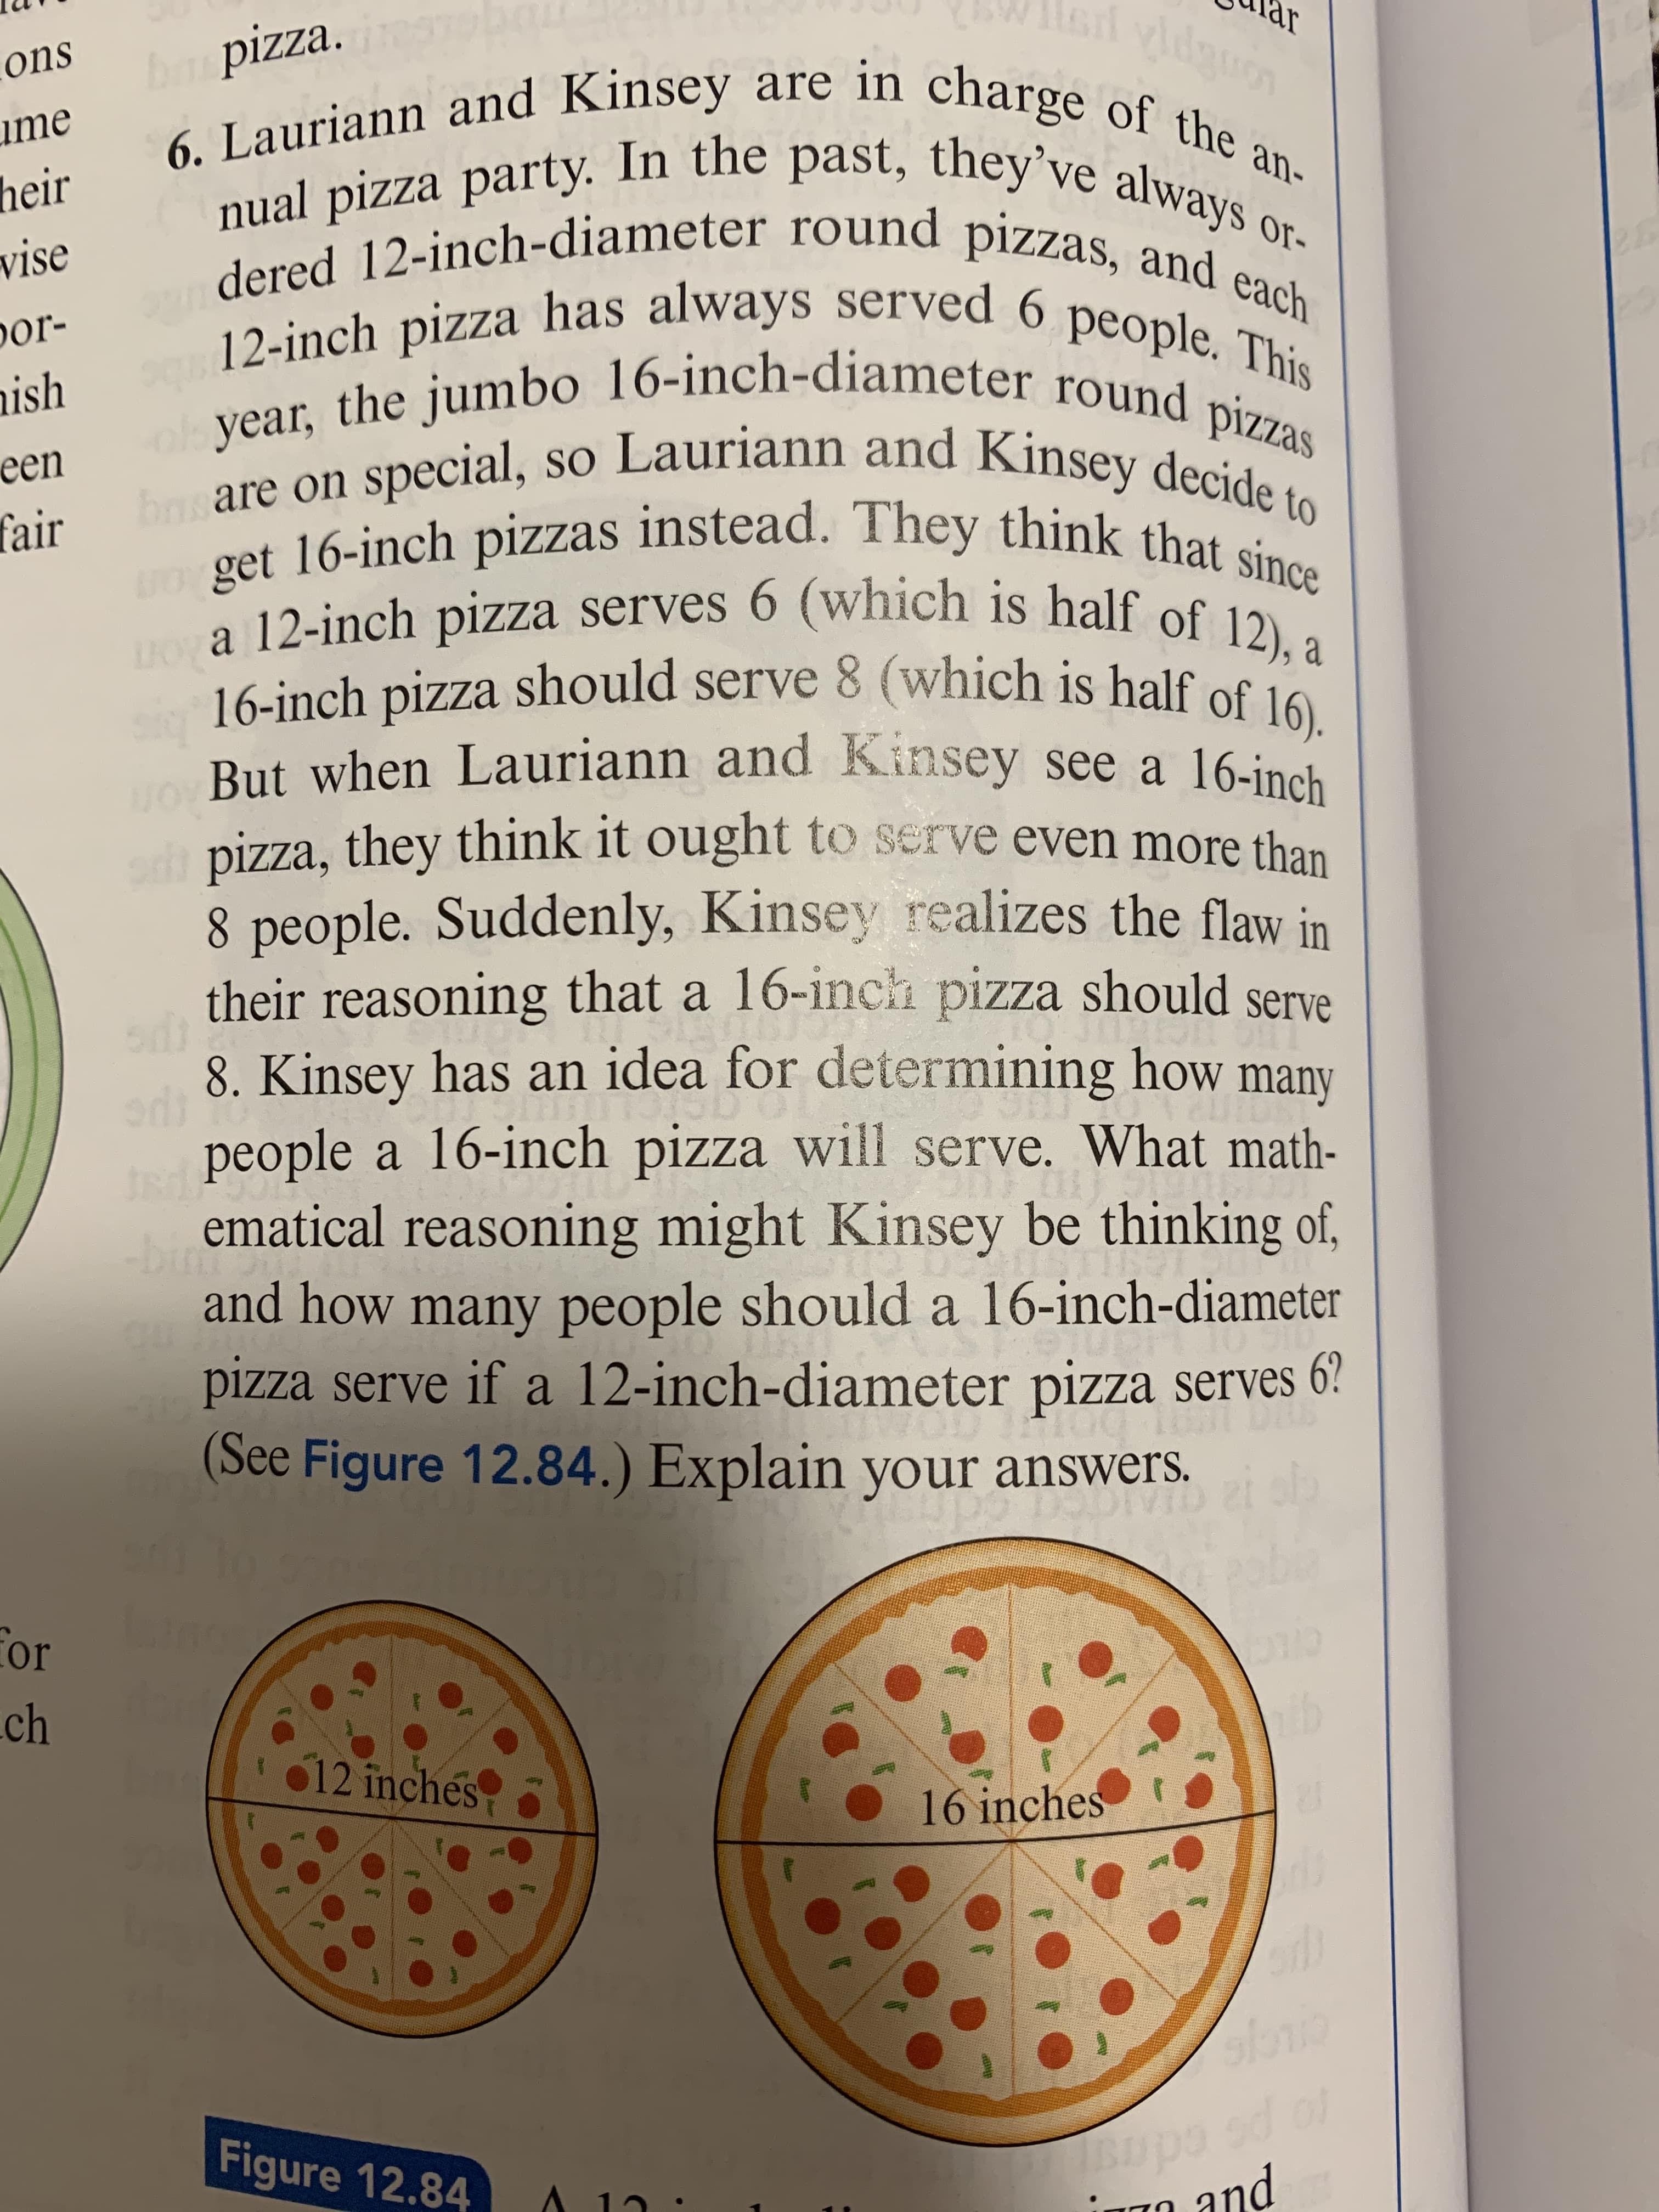 their reasoning that a 16-inch pizza should serve
8. Kinsey has an idea for determining how
people a 16-inch pizza will serve. What math-
ematical reasoning might Kinsey be thinking of,
many
bin
and how many people should a 16-inch-diameter
pizza serve if a 12-inch-diameter pizza serves 6?
(See Figure 12.84 ) Exnlain your answers.
